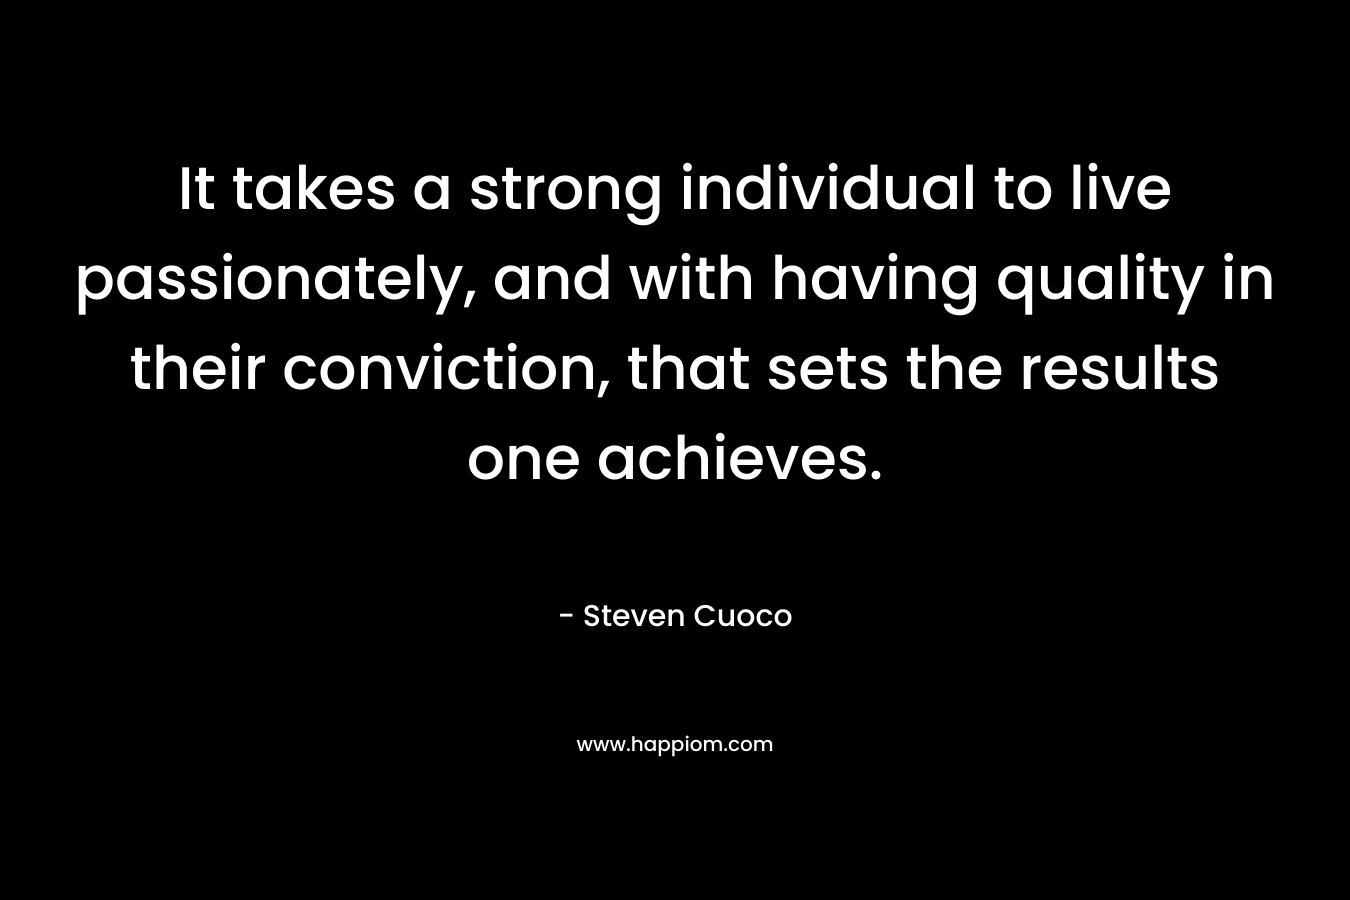 It takes a strong individual to live passionately, and with having quality in their conviction, that sets the results one achieves. – Steven Cuoco